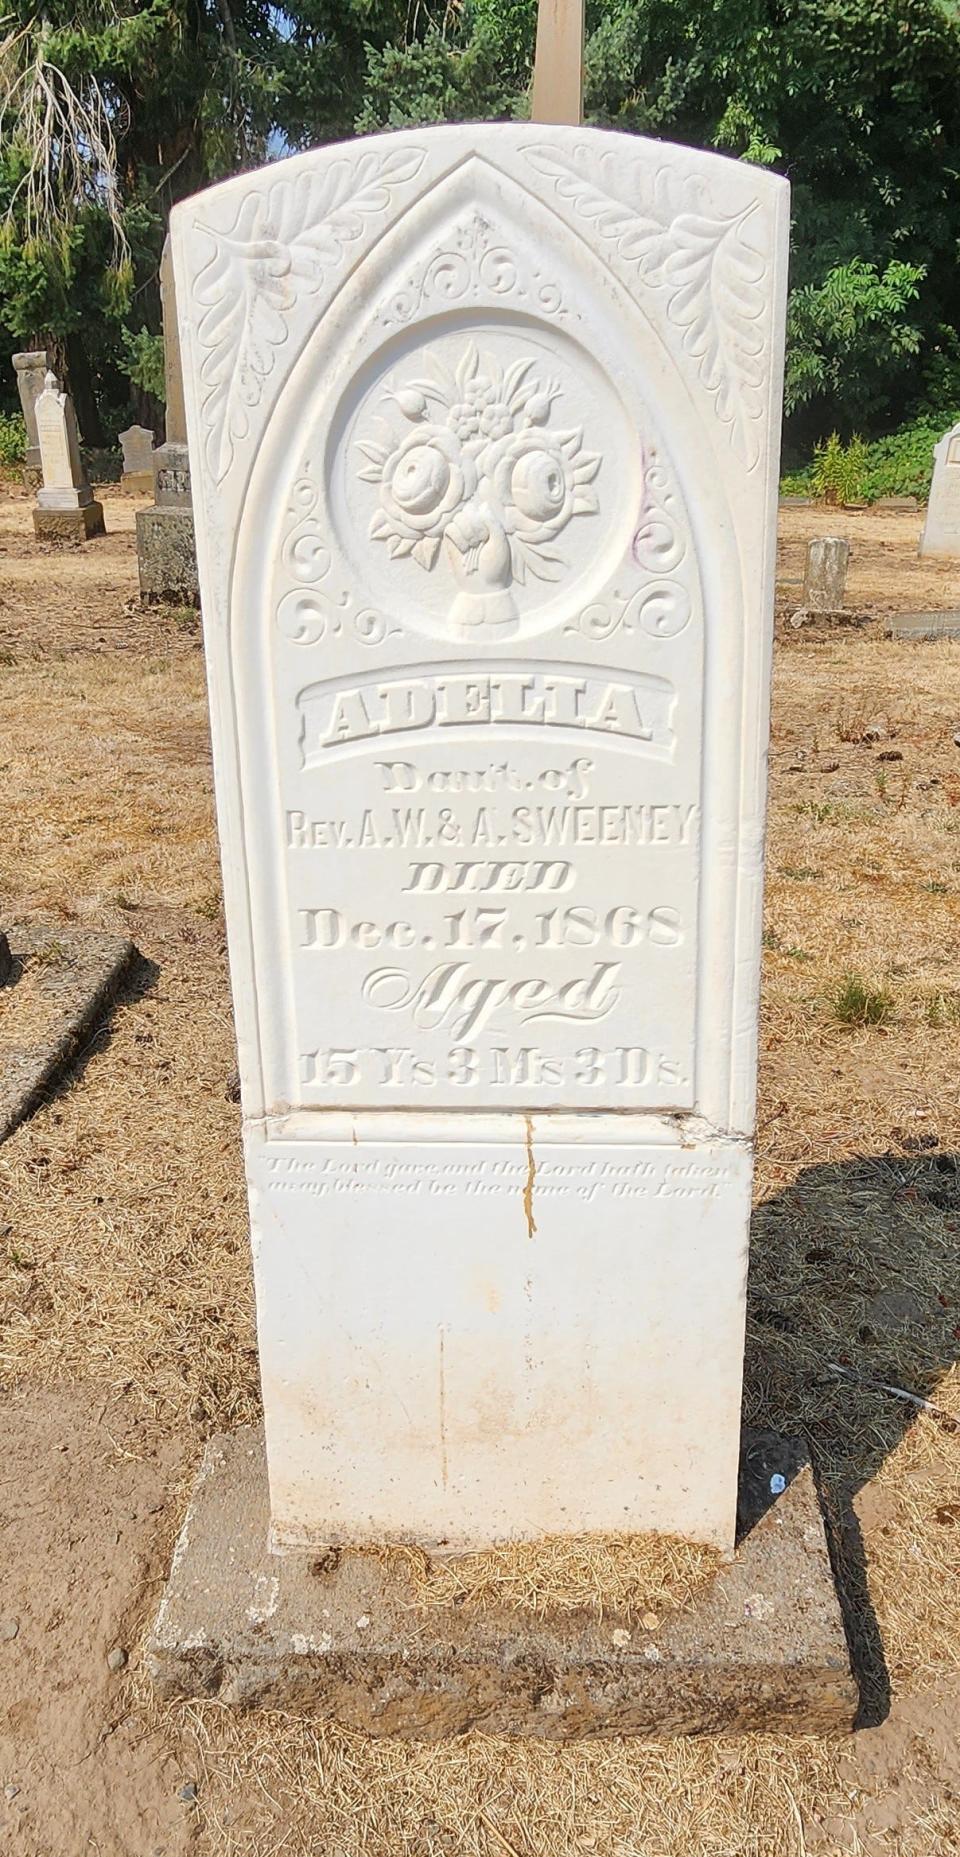 The headstone for Adelia Sweeny after it was cleaned.